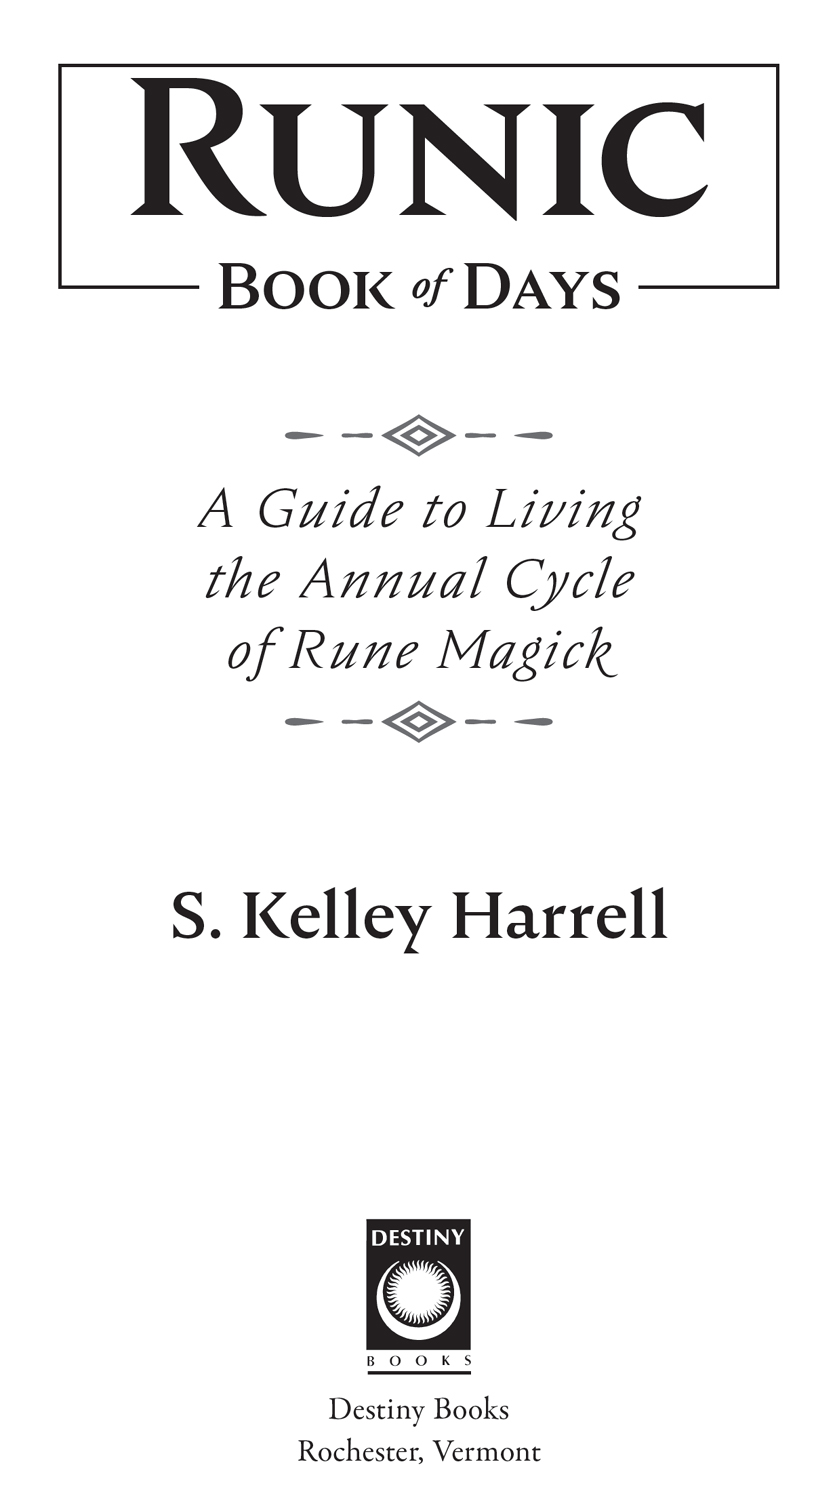 Runic Book of Days A Guide to Living the Annual Cycle of Rune Magick - image 2